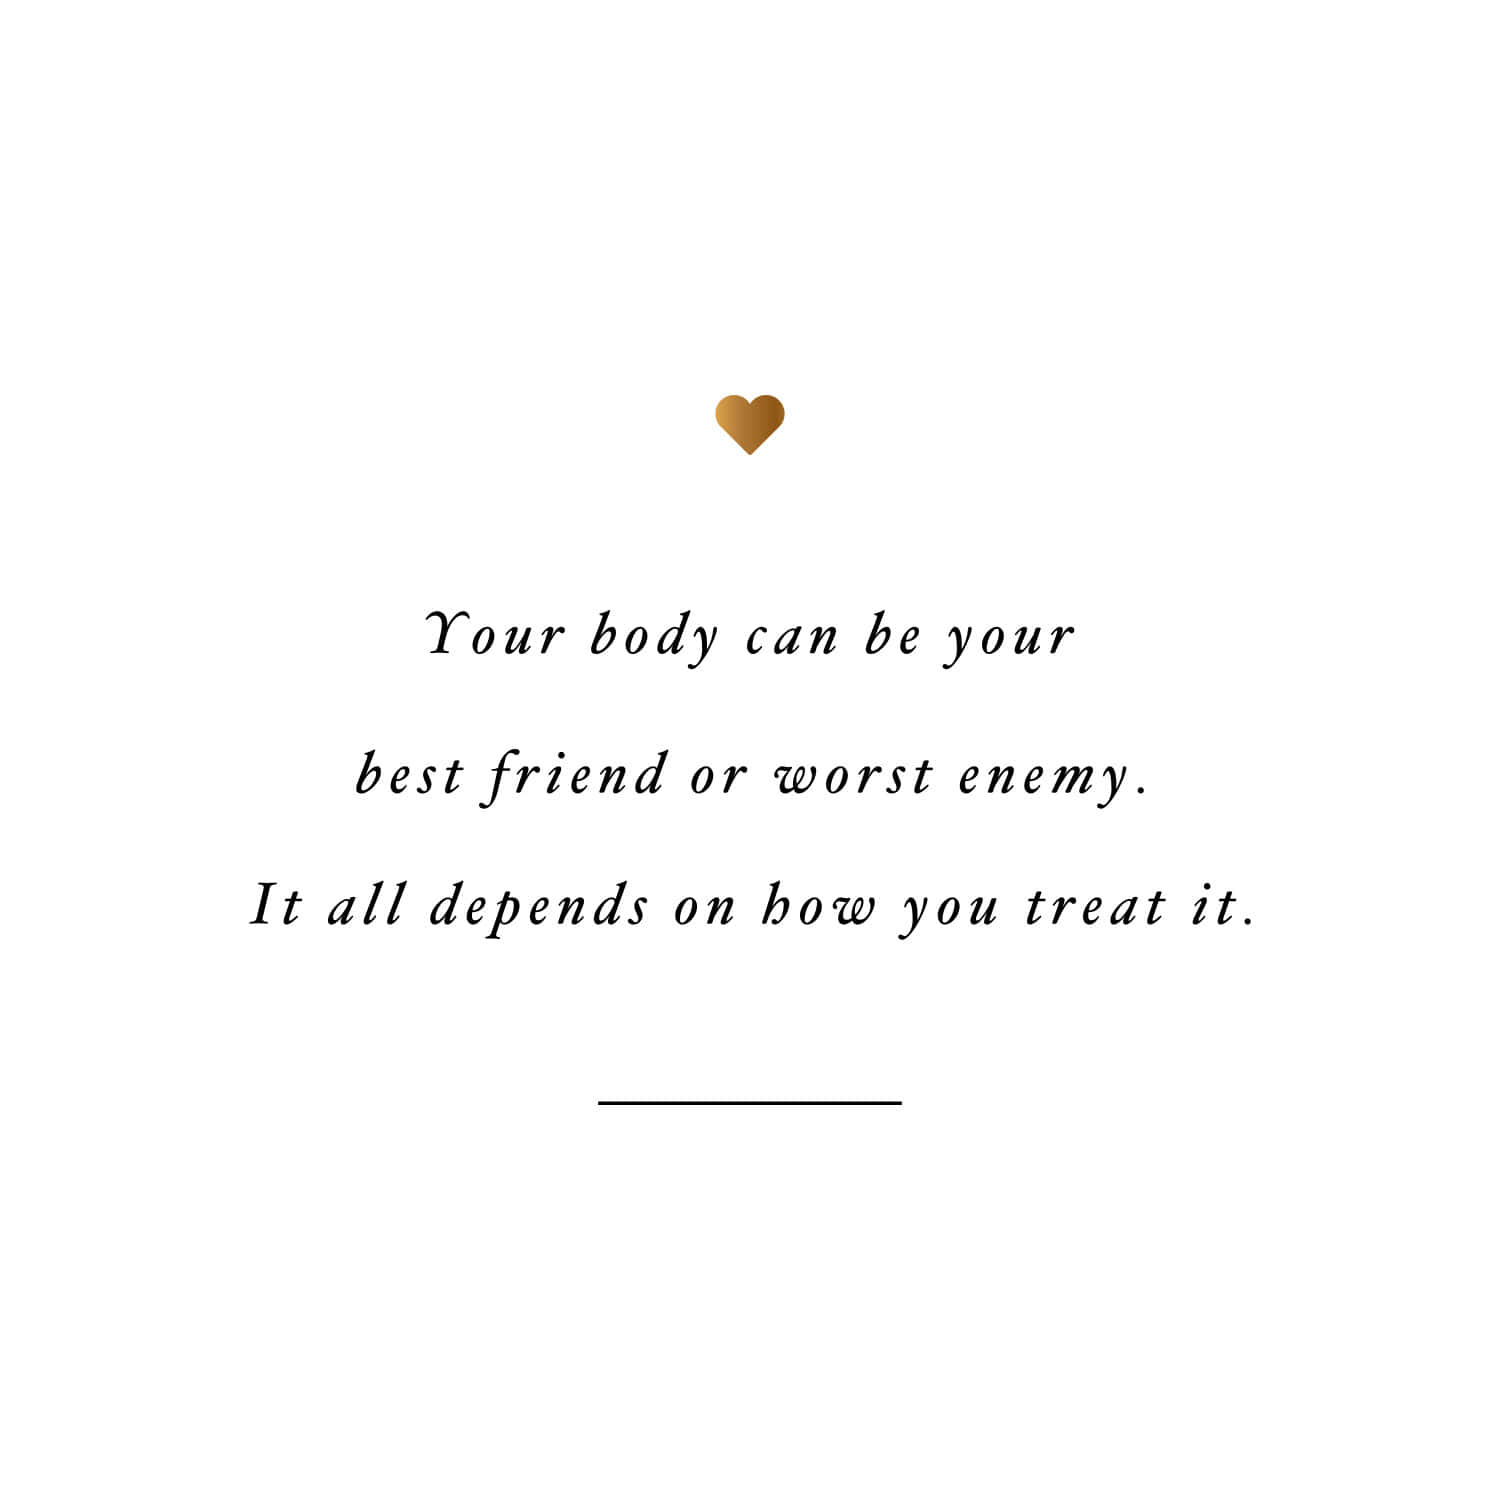 Body_ Friend_or_ Enemy_ Health_ Quote Wallpaper